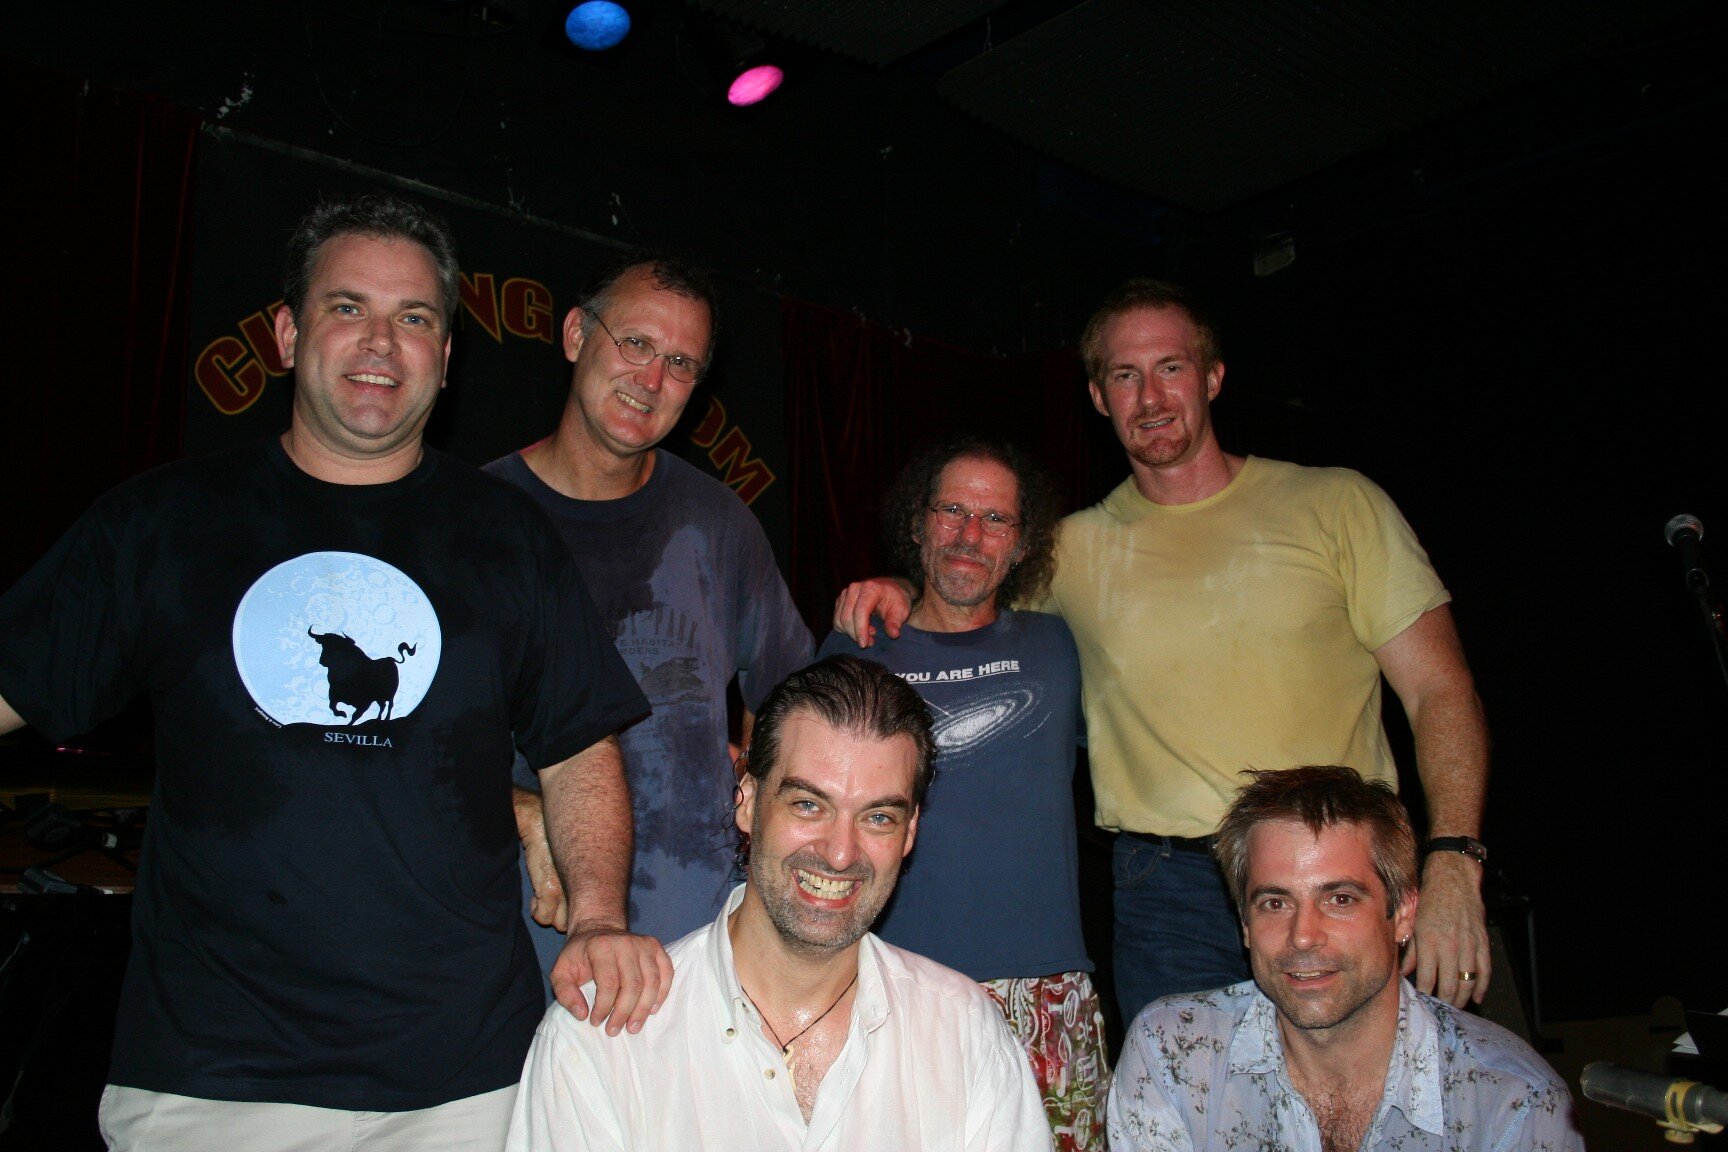 An early version of PHX (formerly “Phoenix”): Brian Sears, Dave Meade, Patrick Pfeiffer, Gary Corwin, John Tennyson and Sean Harkness 